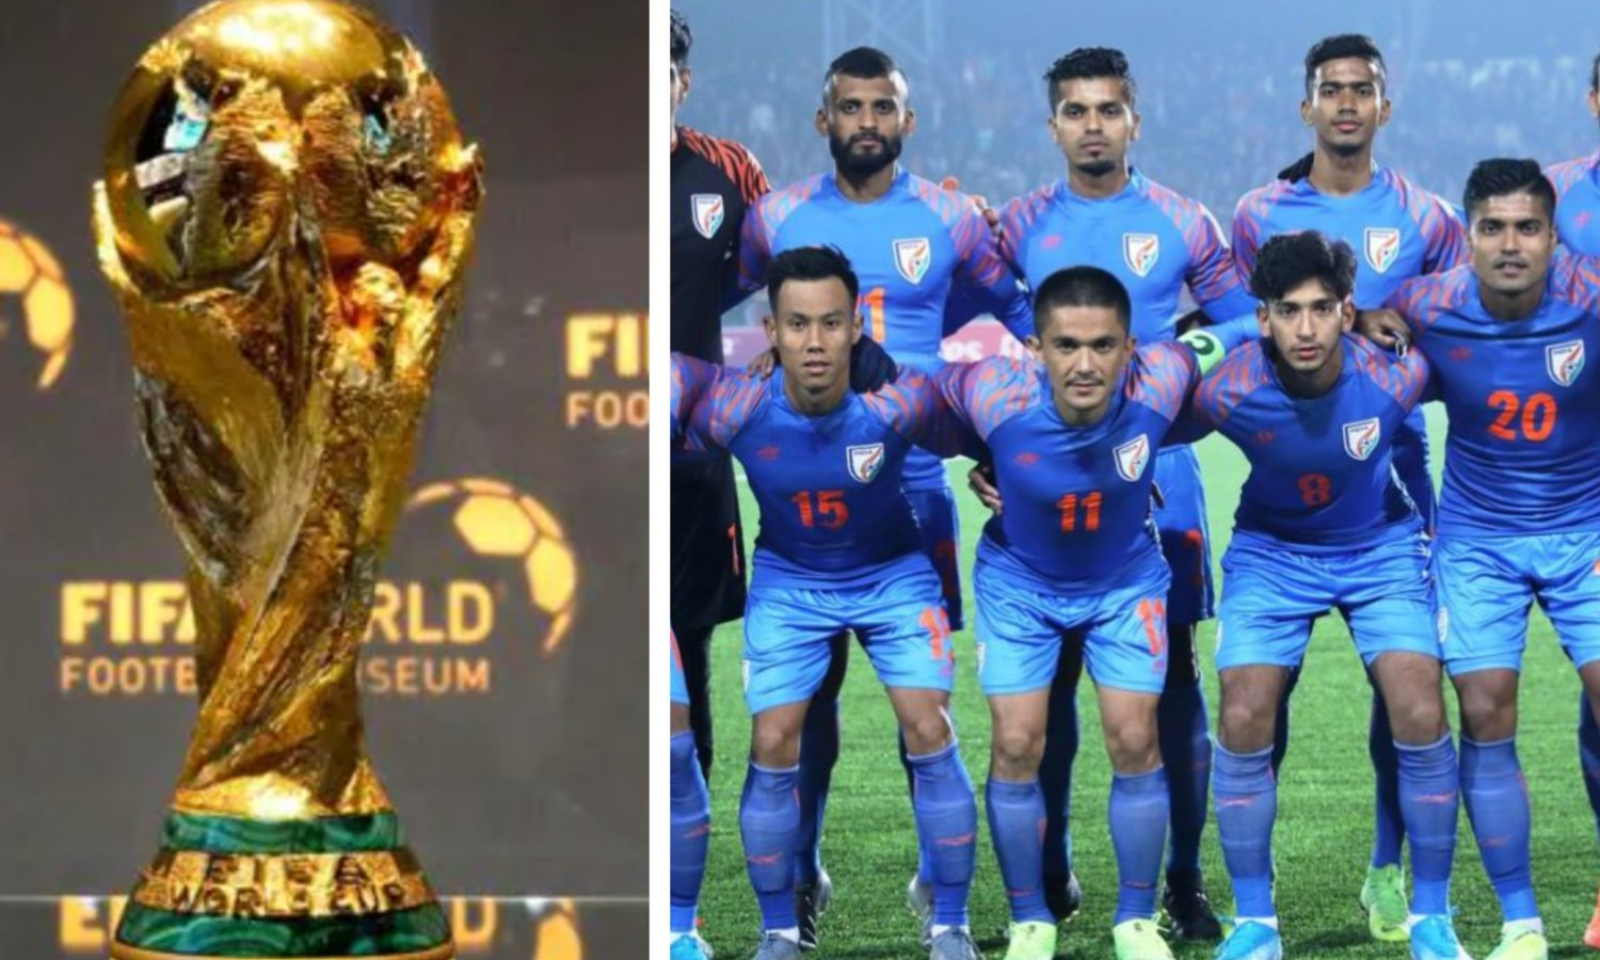 Decoding the Indian football team ranking over the years